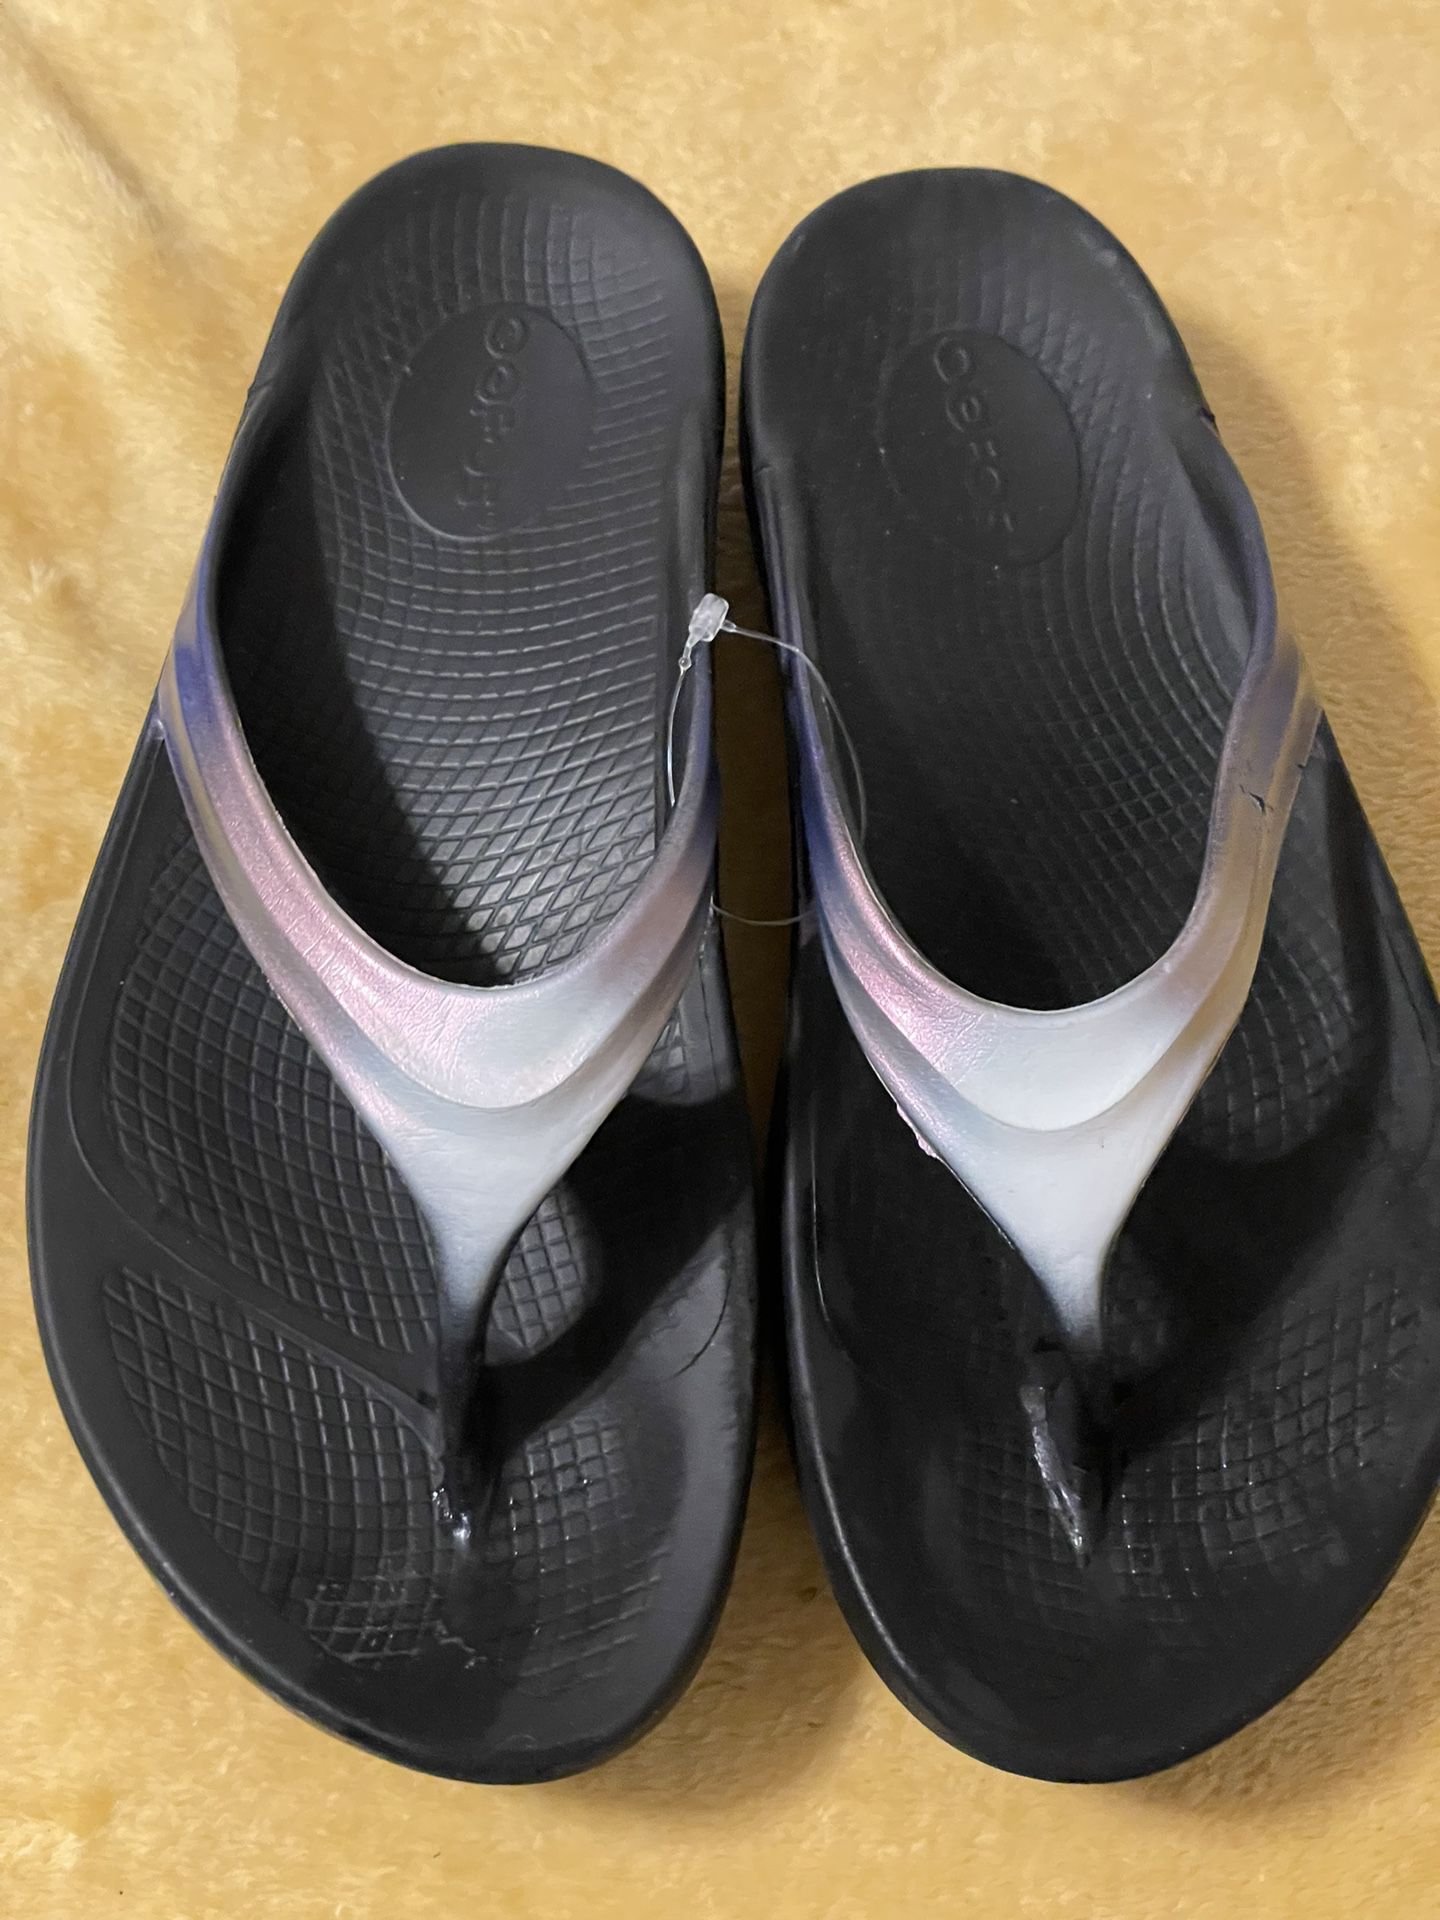 Oofos Woman Slippers Size 9